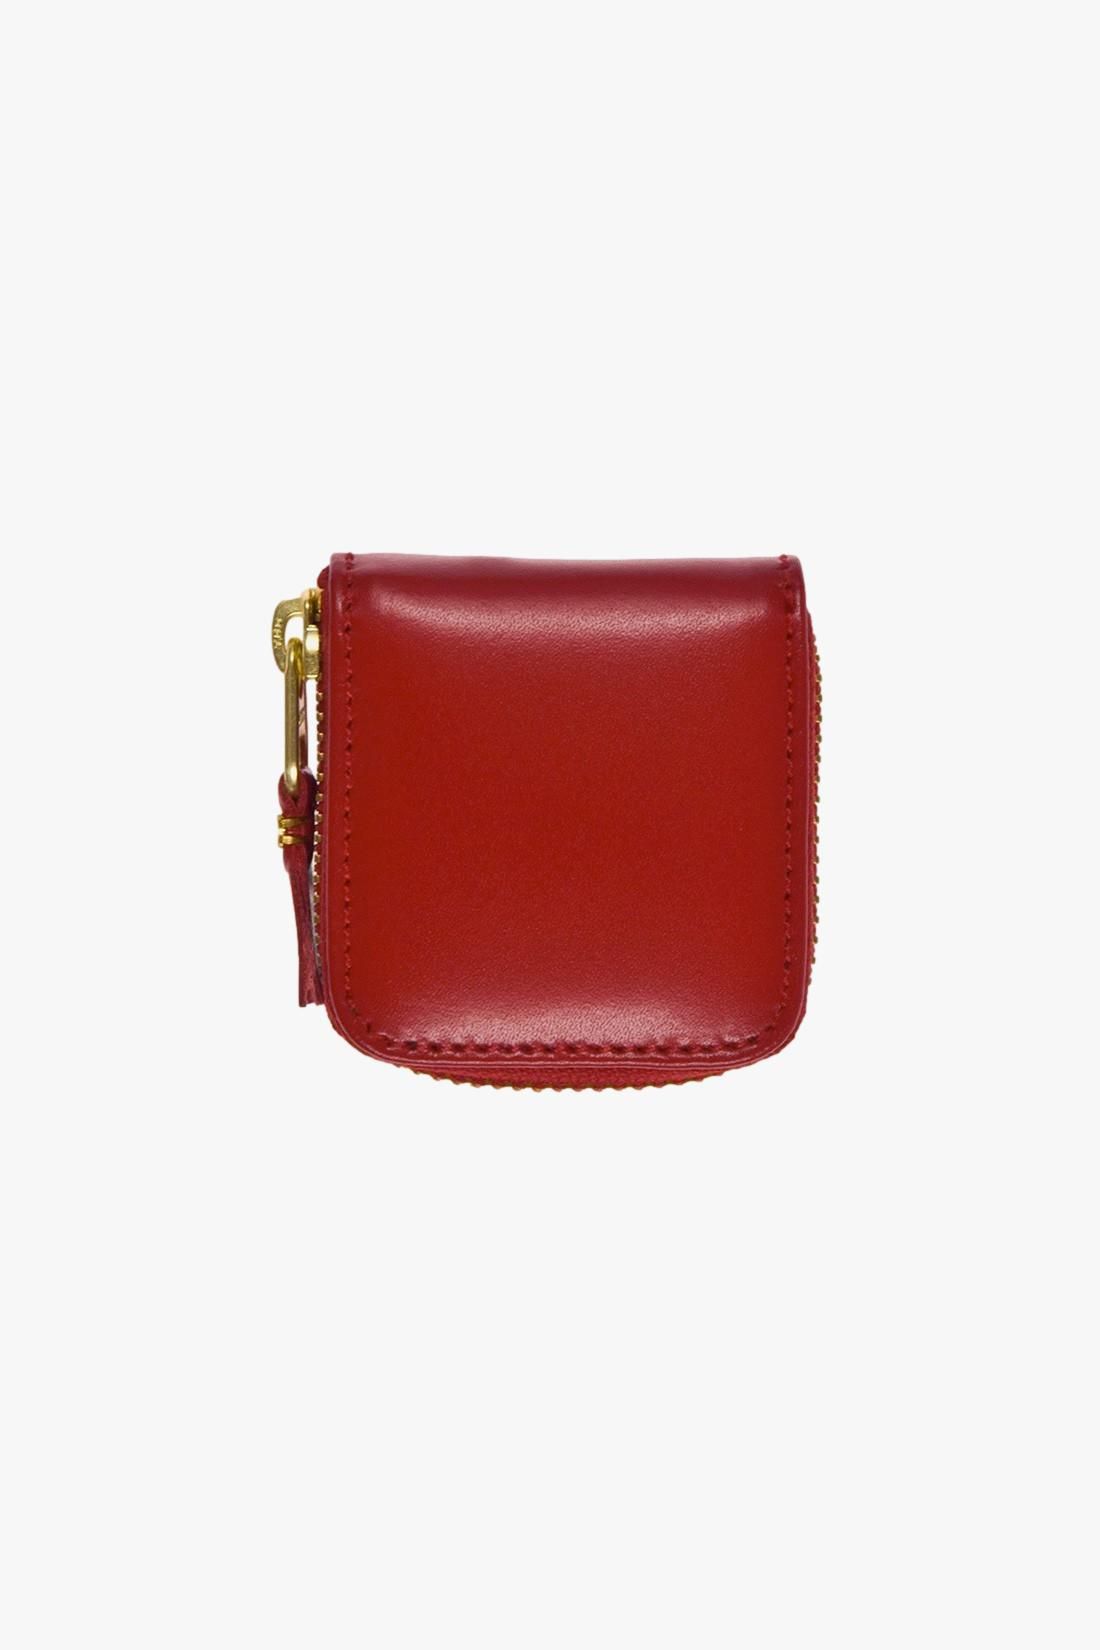 Cdg leather wallet classic Red